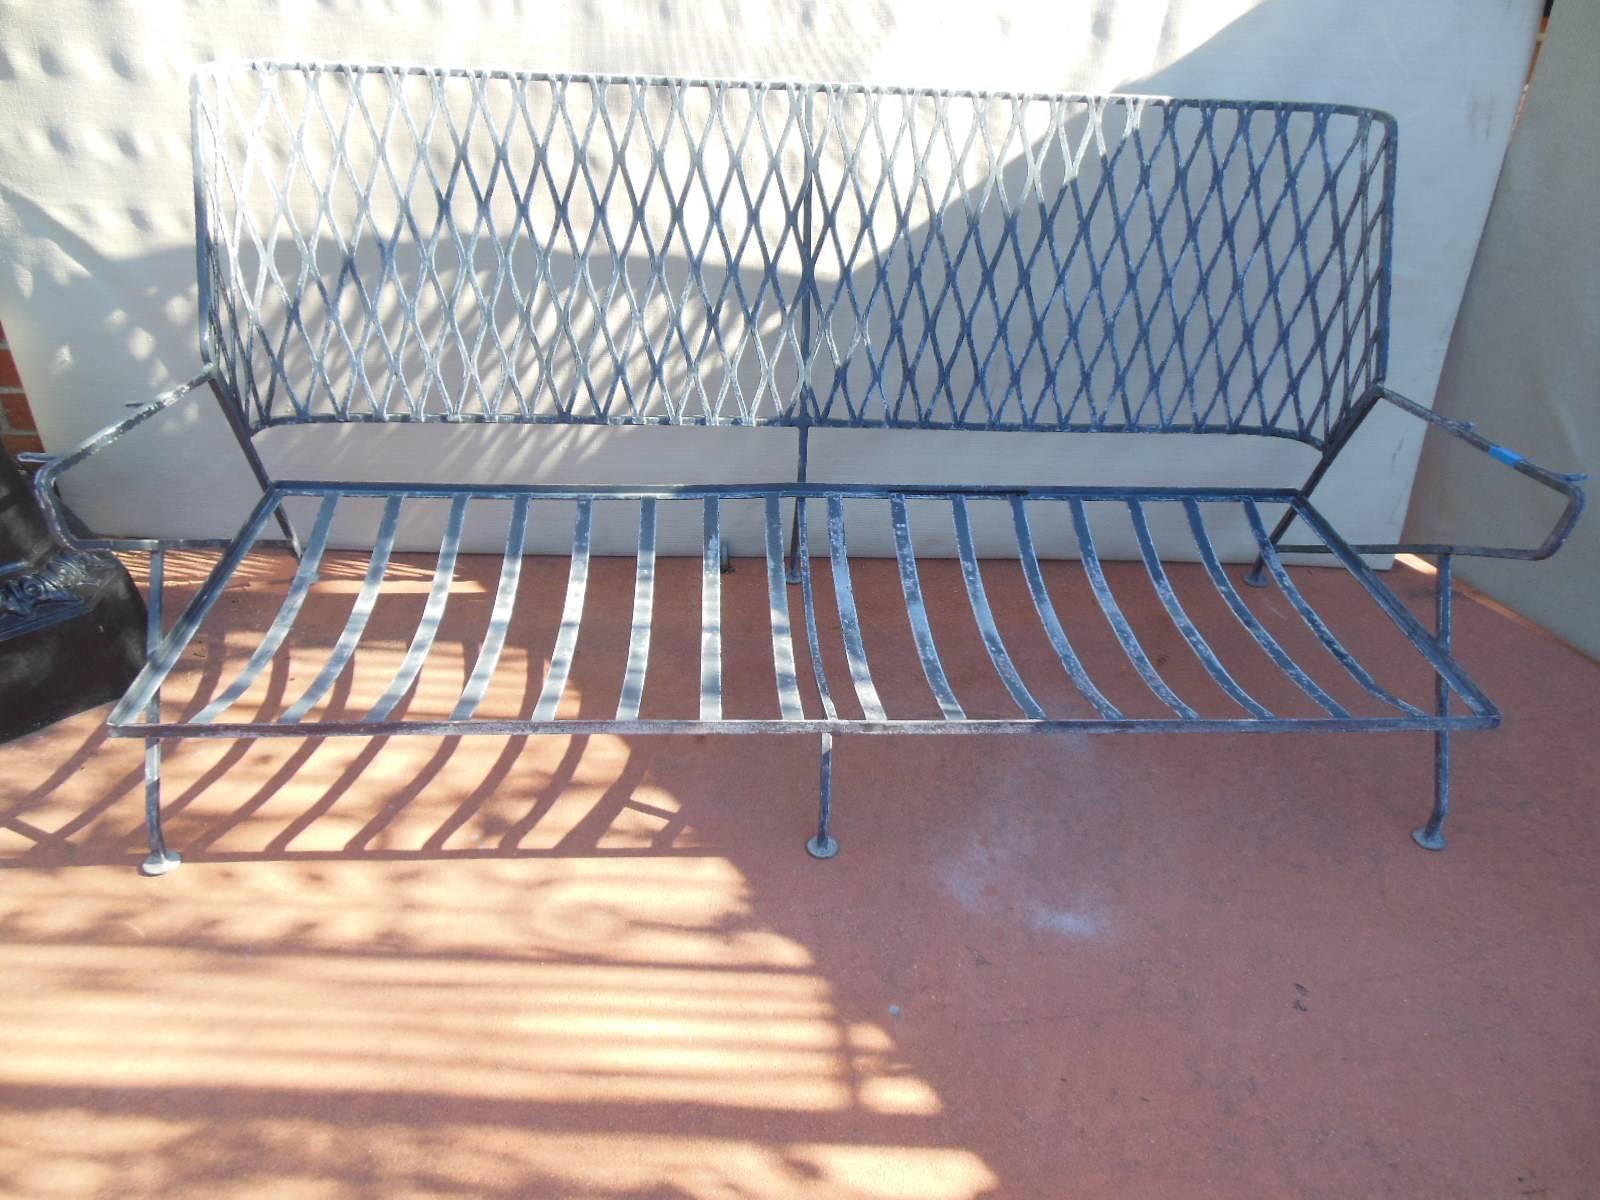 A six-piece Salterini wrought iron patio set, in the Mid-Century Modern style.
Designed by Maurizio Tempestini for Salterini. The set was found in South Beach, where it sat on a waterfront terrace for over 50 years. The set consists of a large